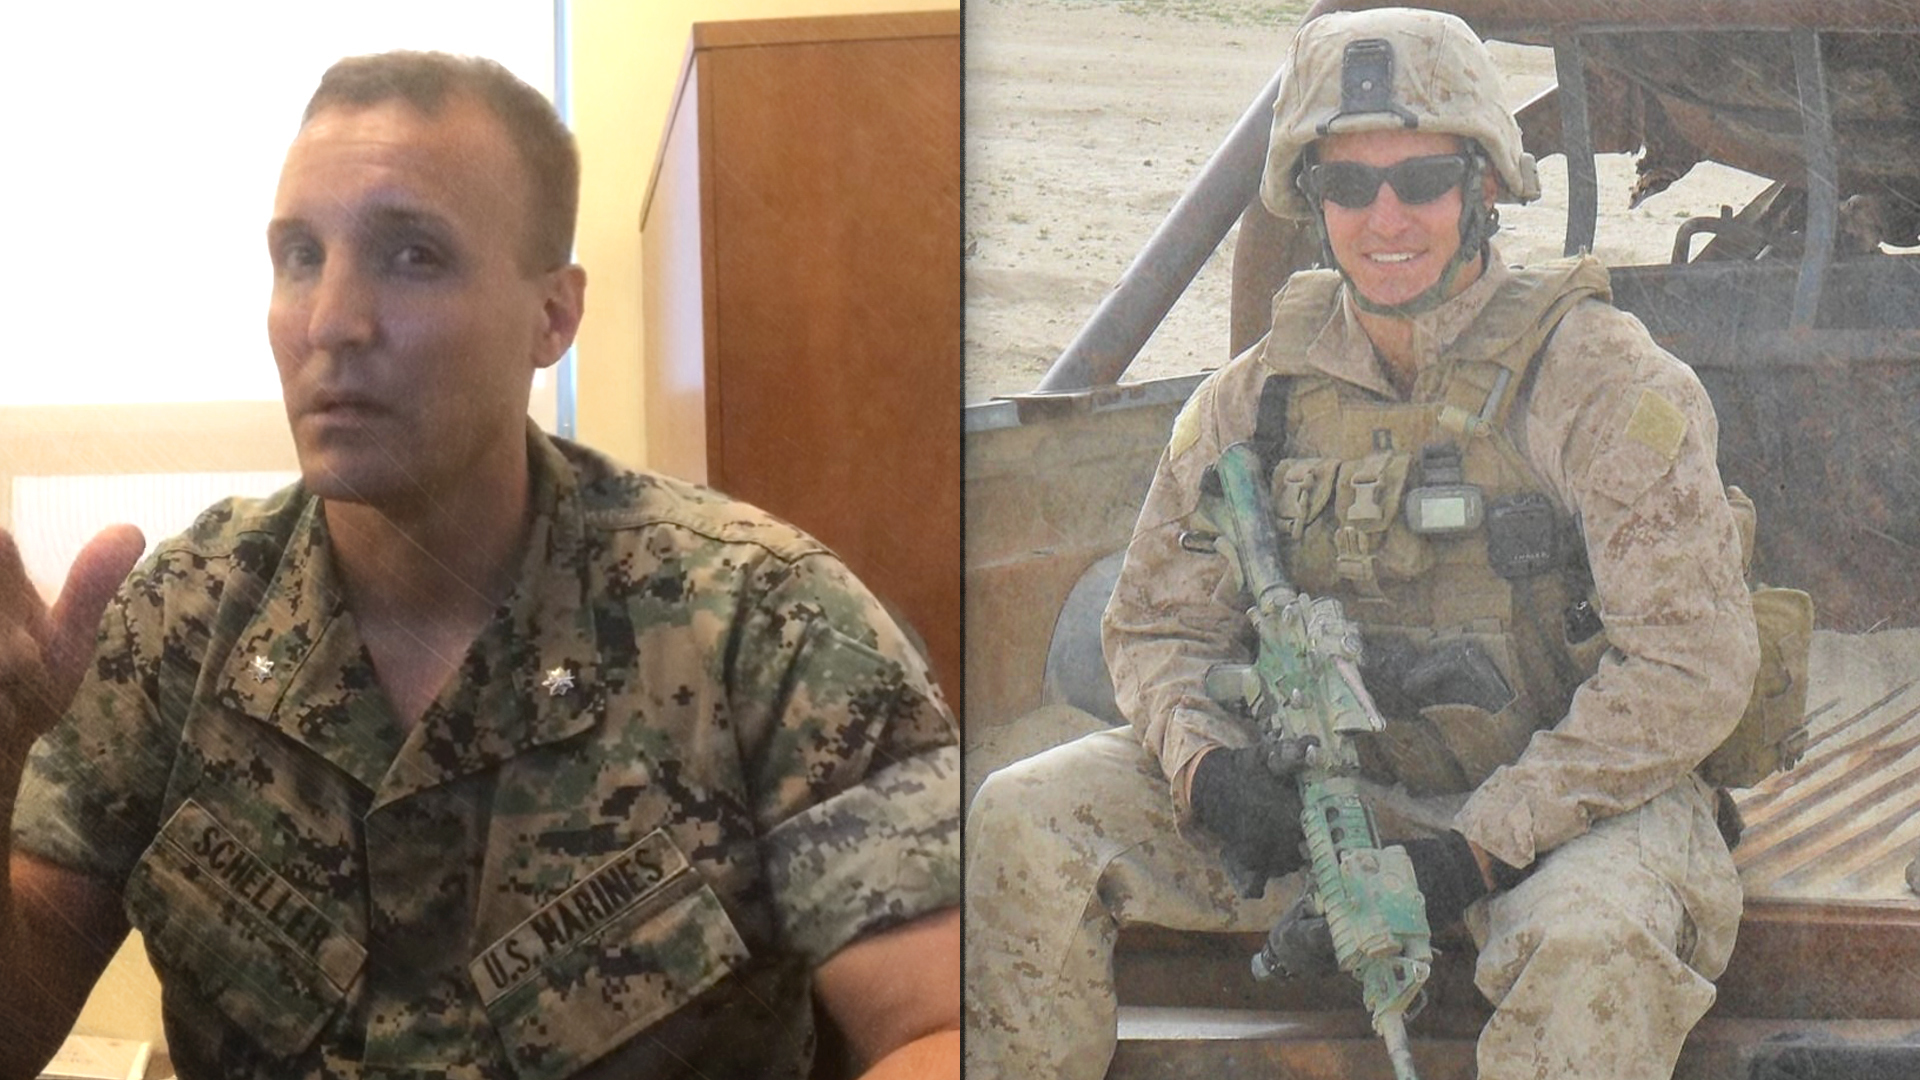 Marine Lt. Col. Stuart Scheller sentenced to forfeit $5,000 in pay and gets letter of reprimand